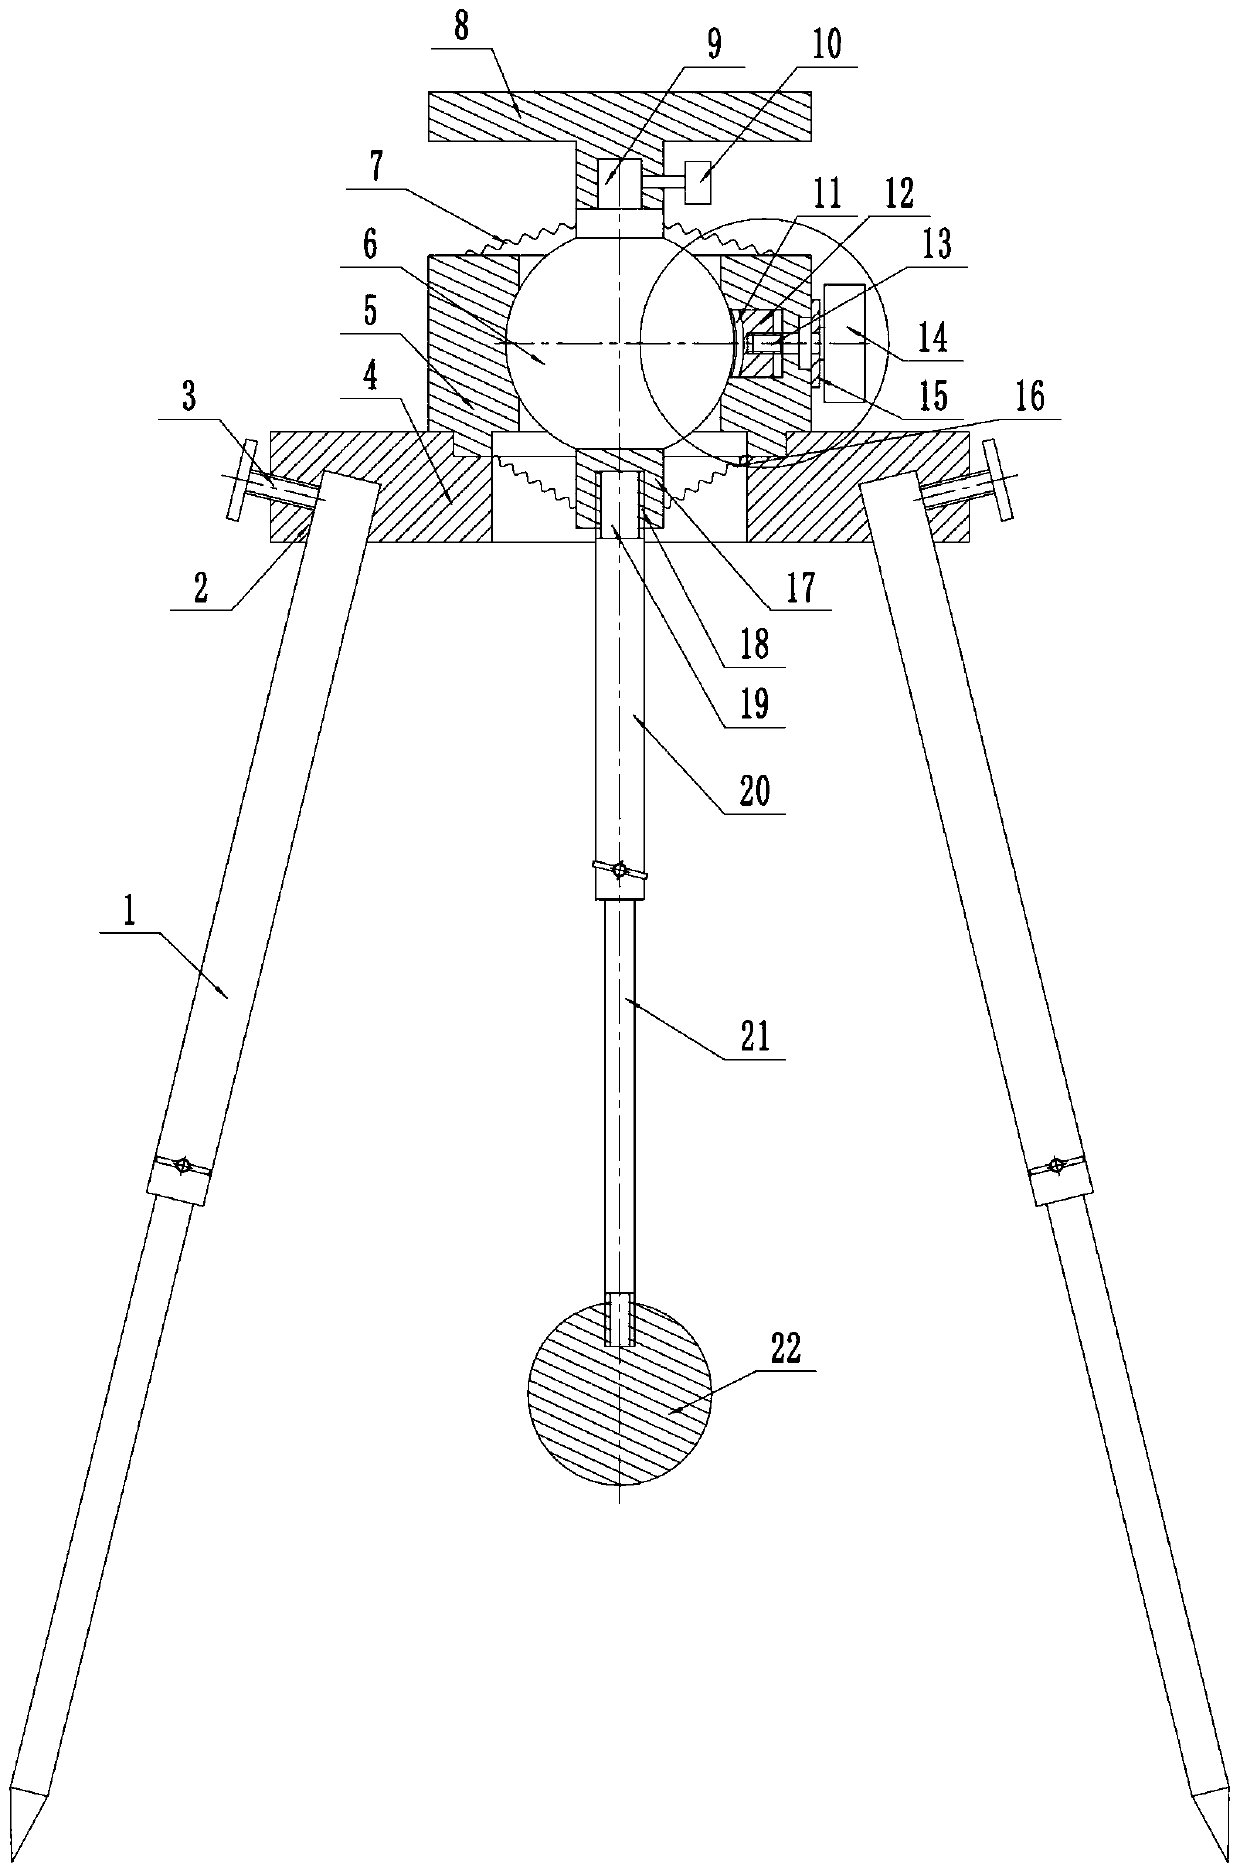 Computer surveying instrument for geological engineering construction